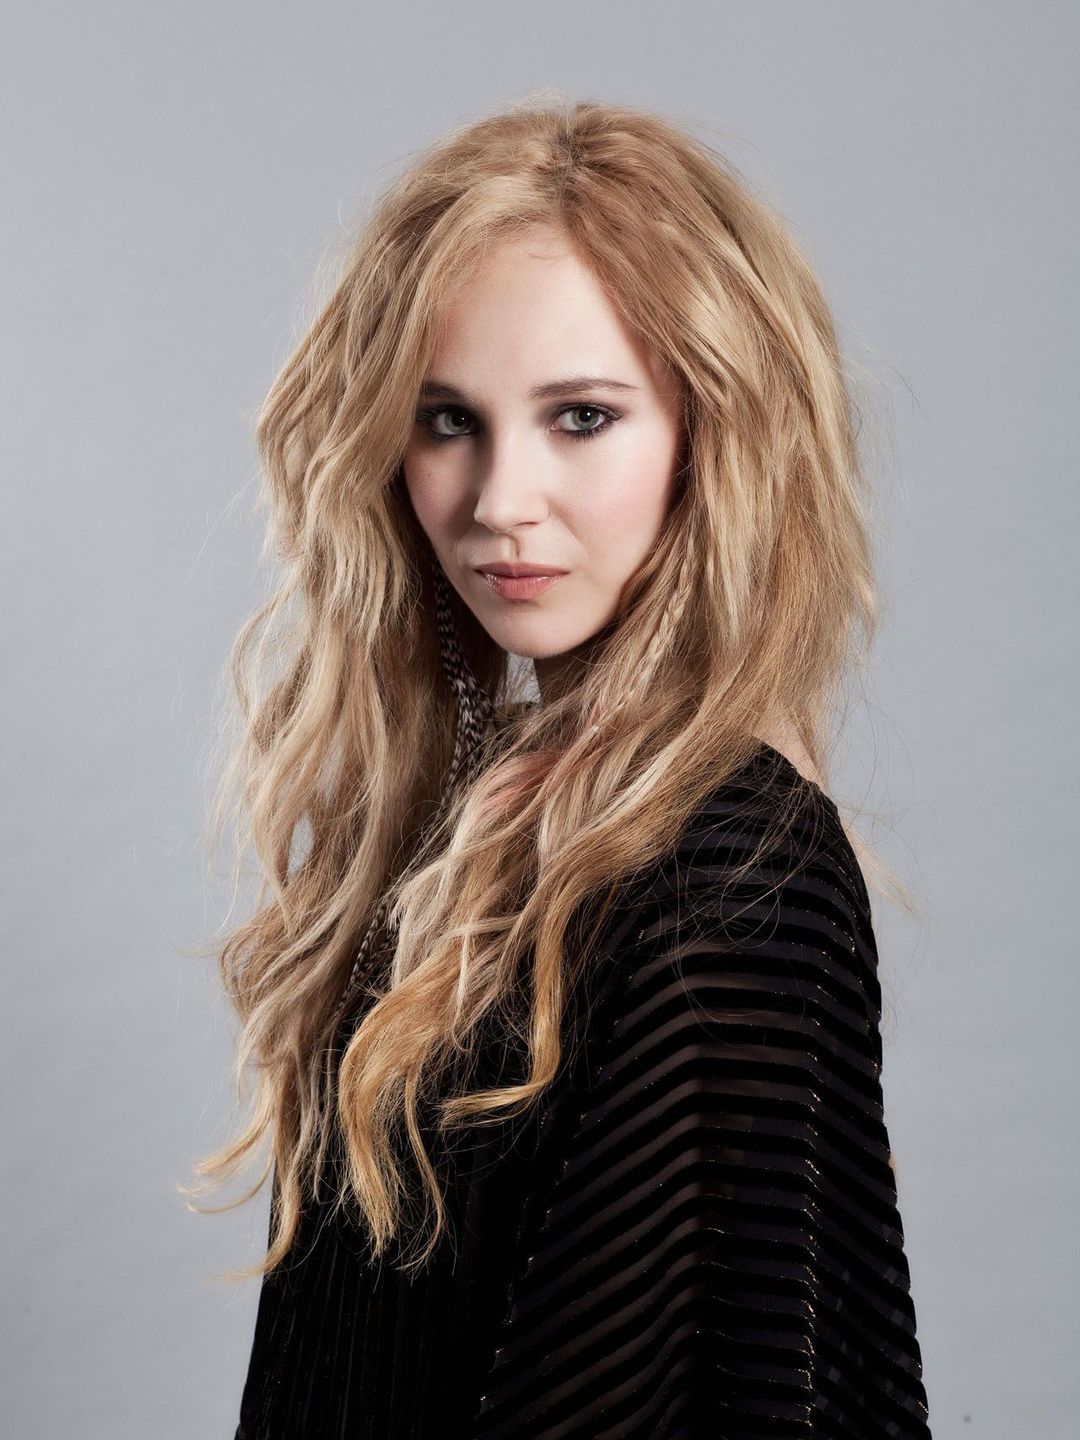 Juno Temple how old is she